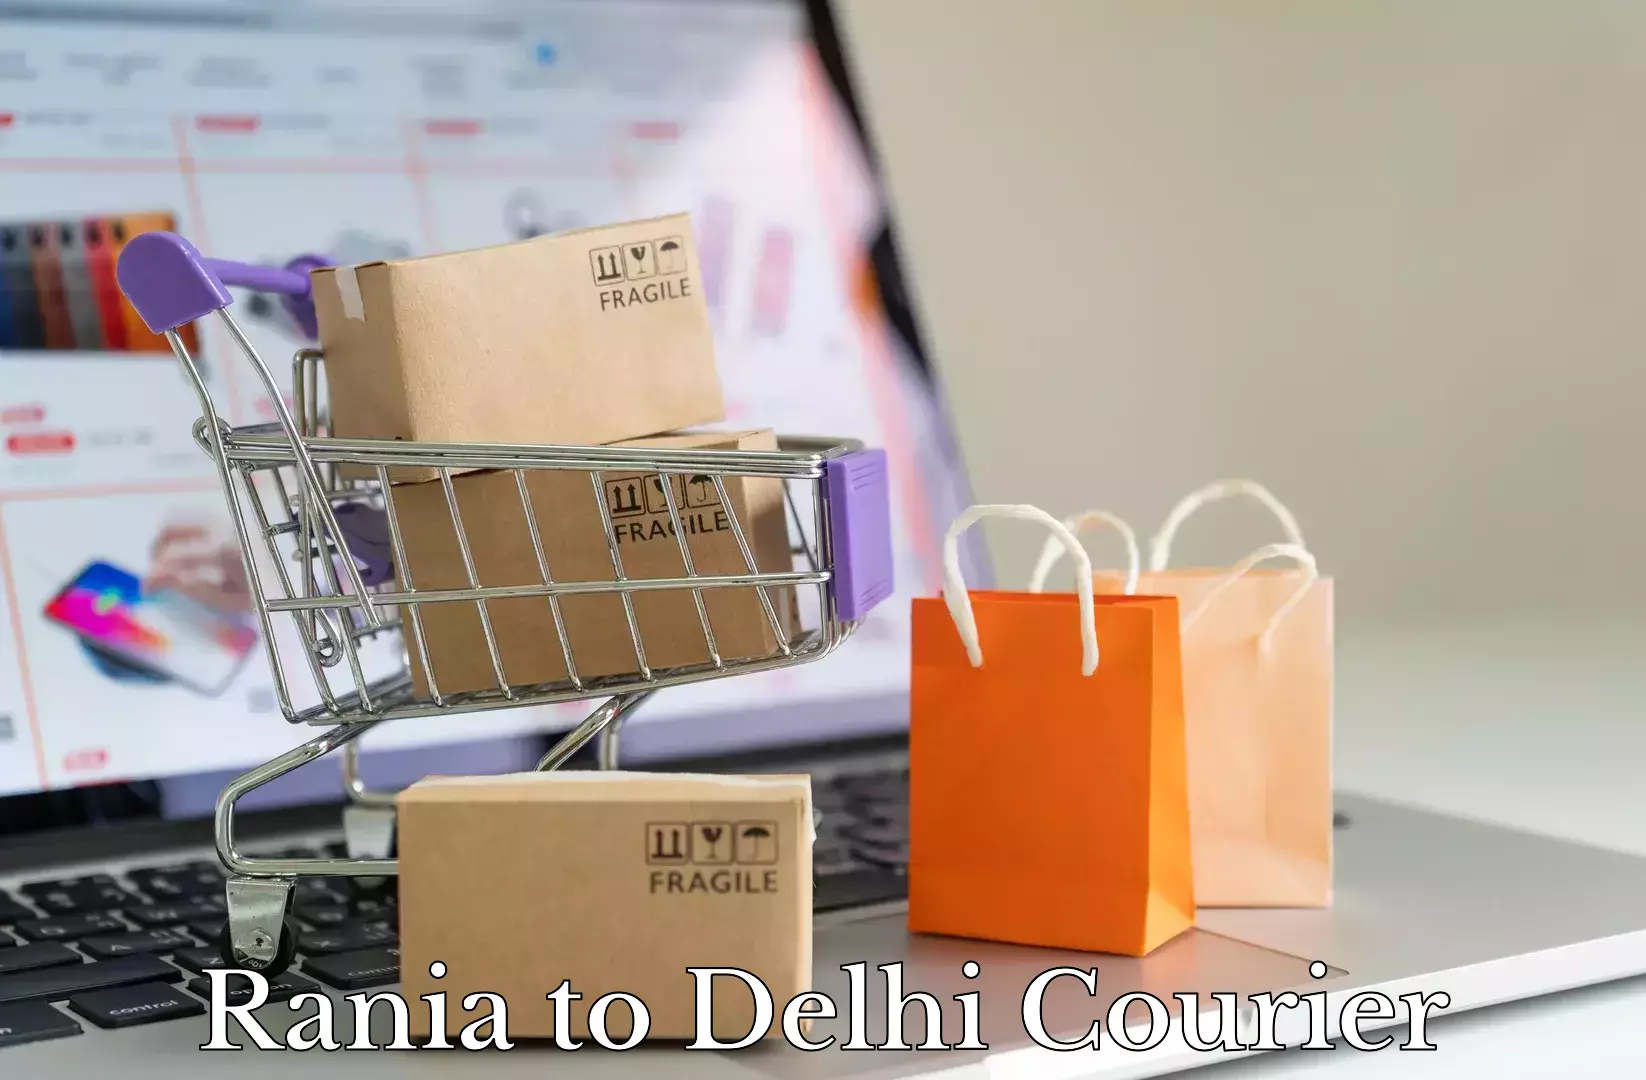 Moving and handling services Rania to Delhi